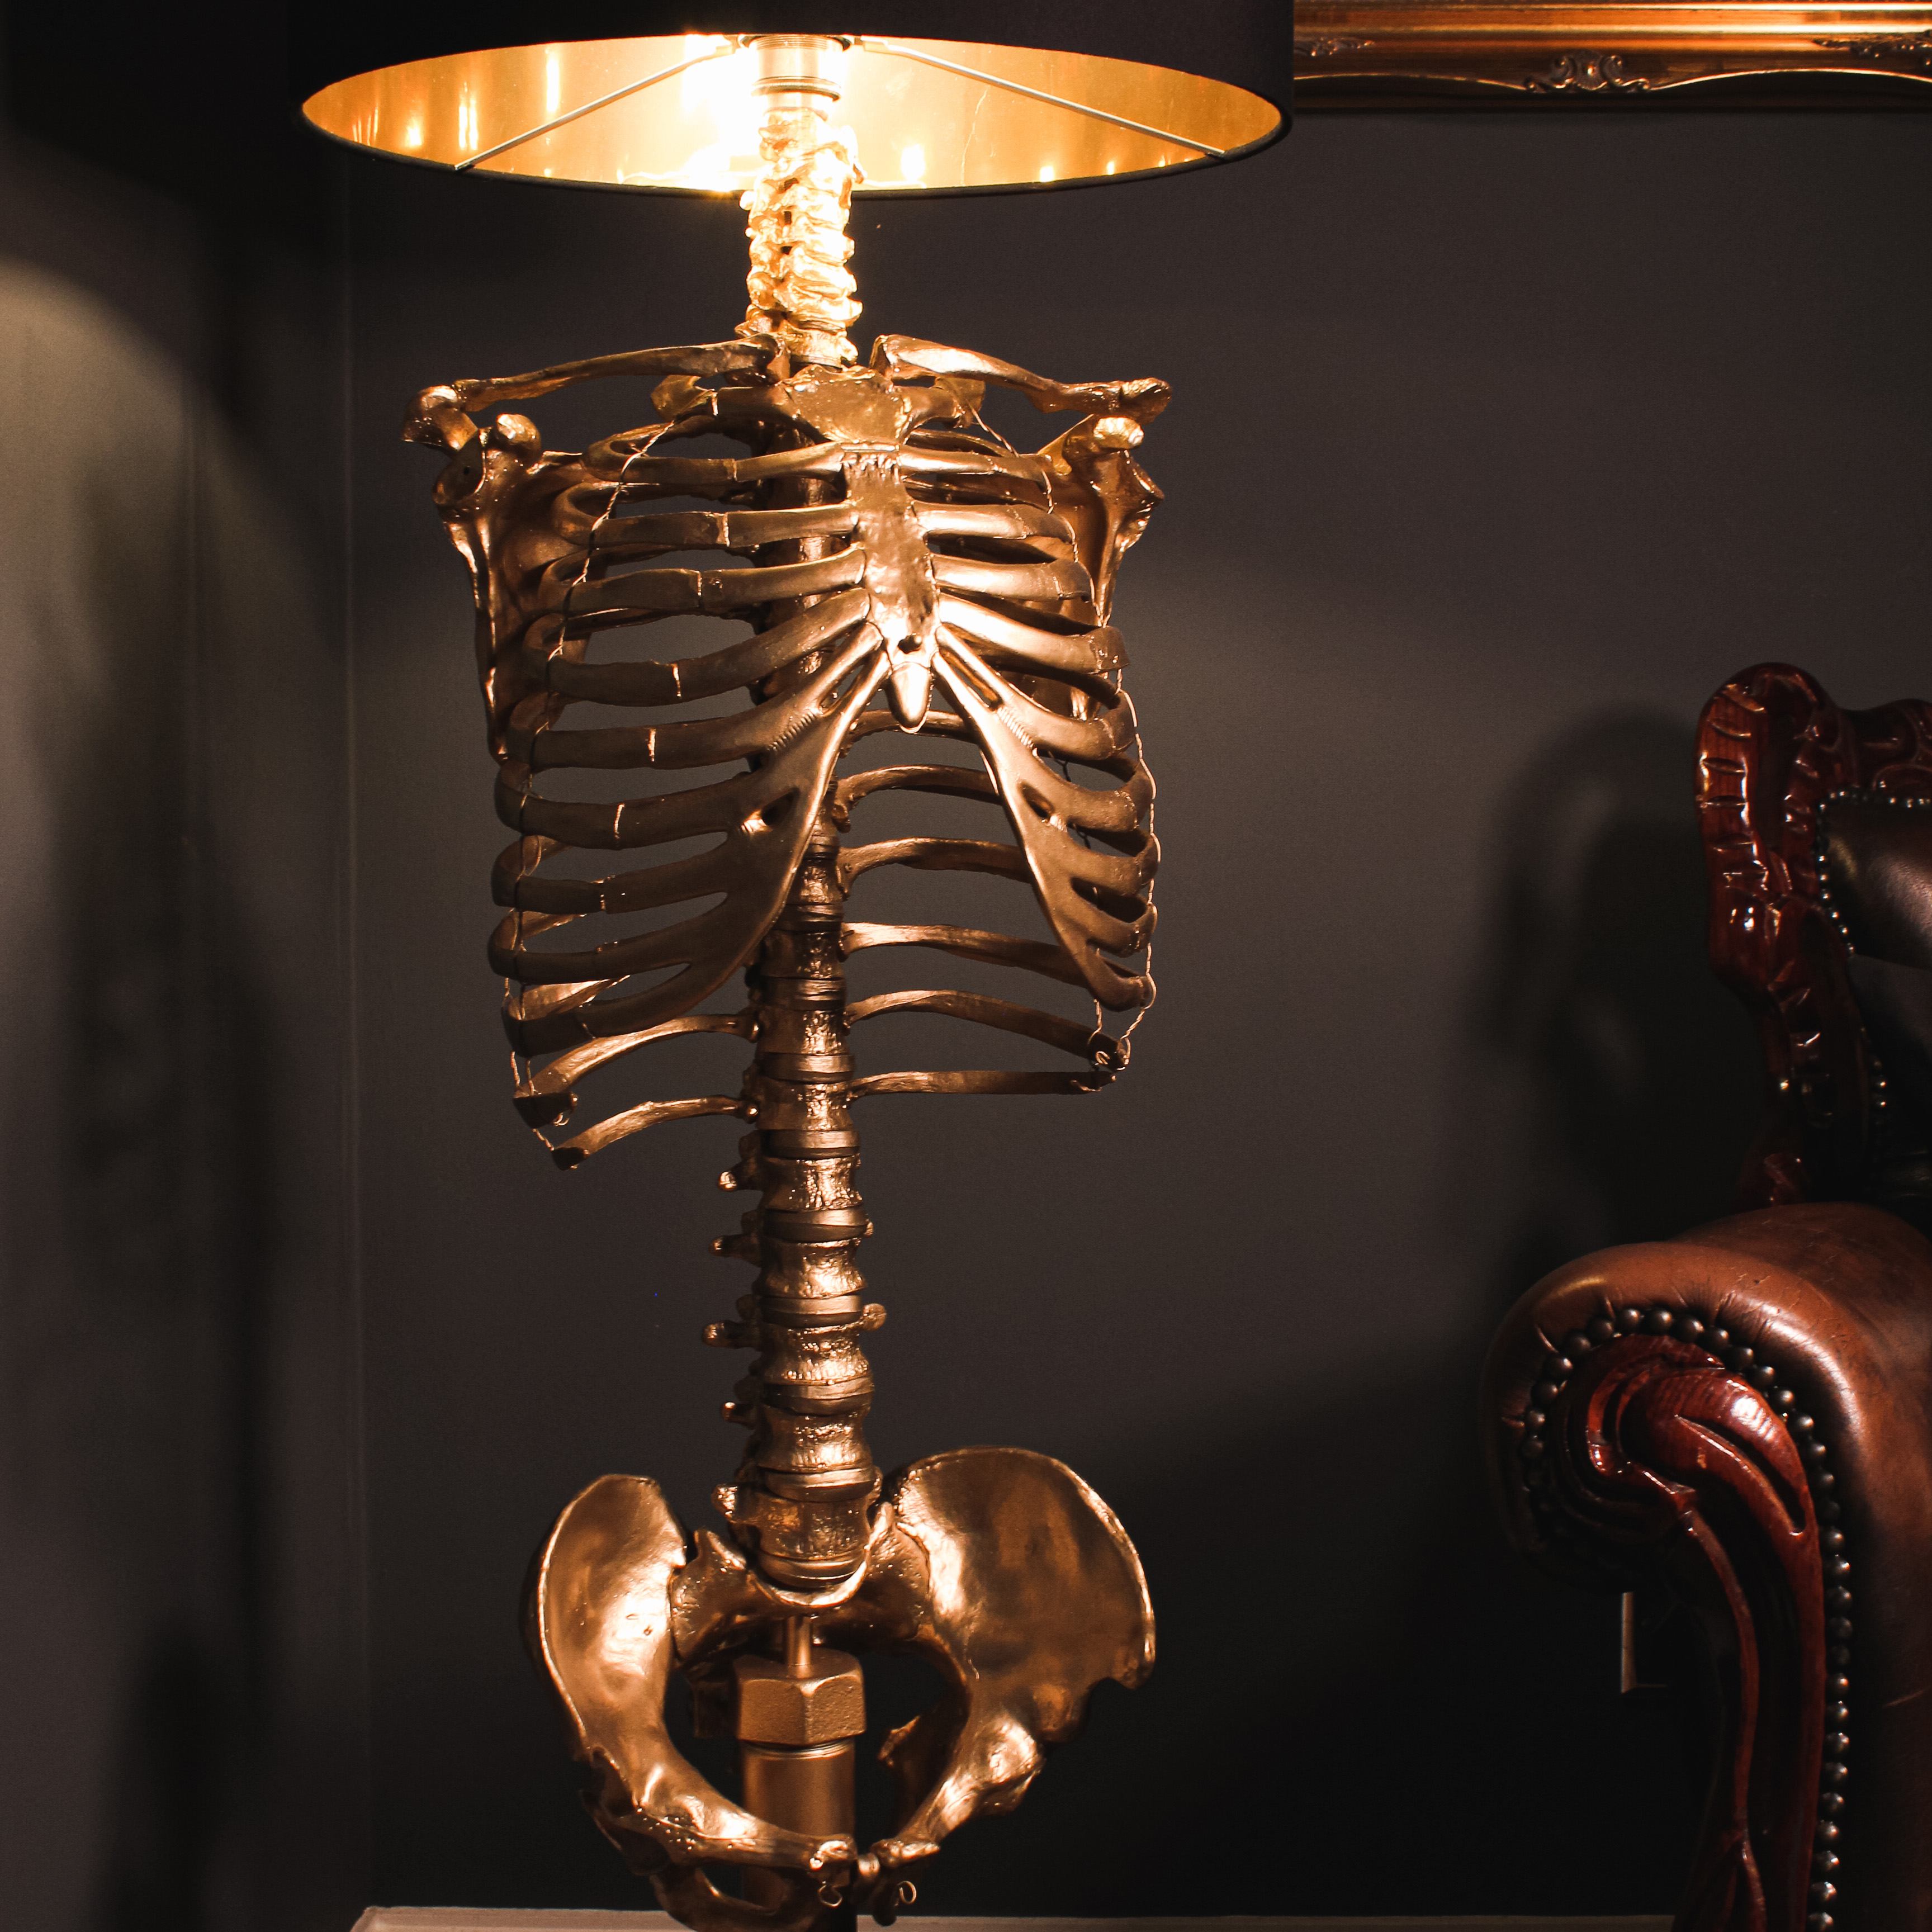 The Gold Skeleton Floor Lamp - Enid Baroque Edition by The Blackened Teeth